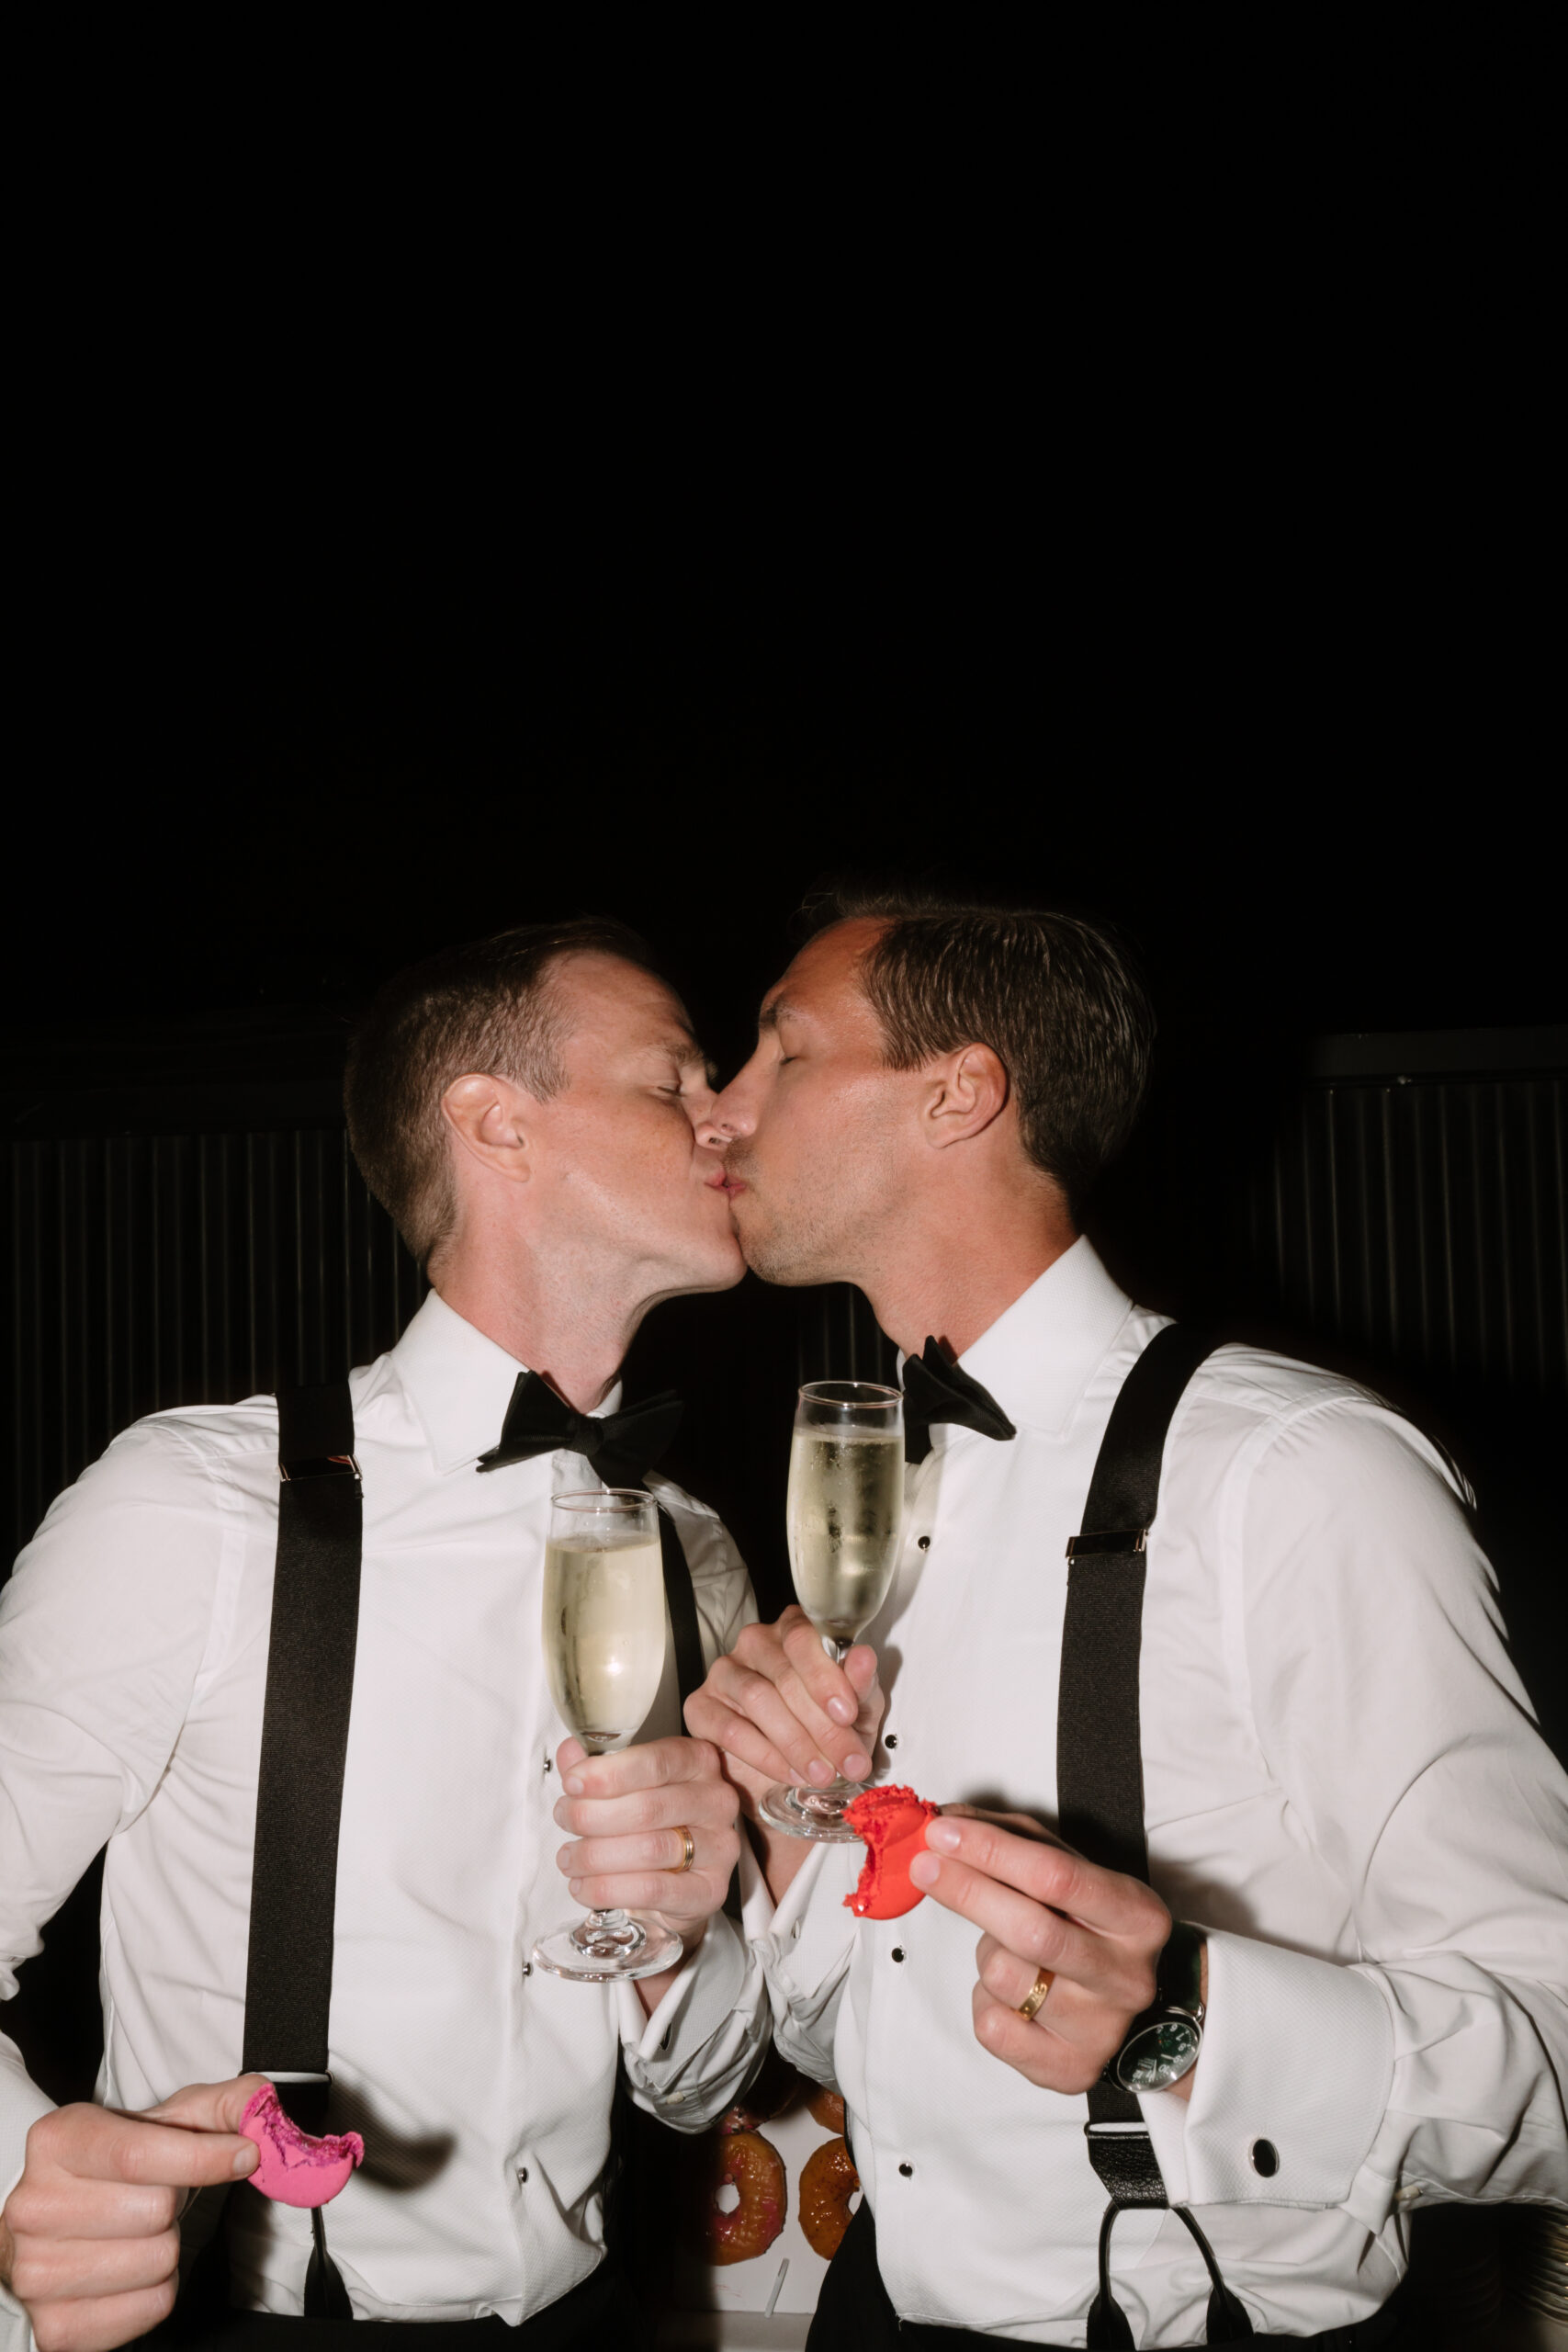 direct flash photo of gay grooms kissing while toasting with champagne flutes